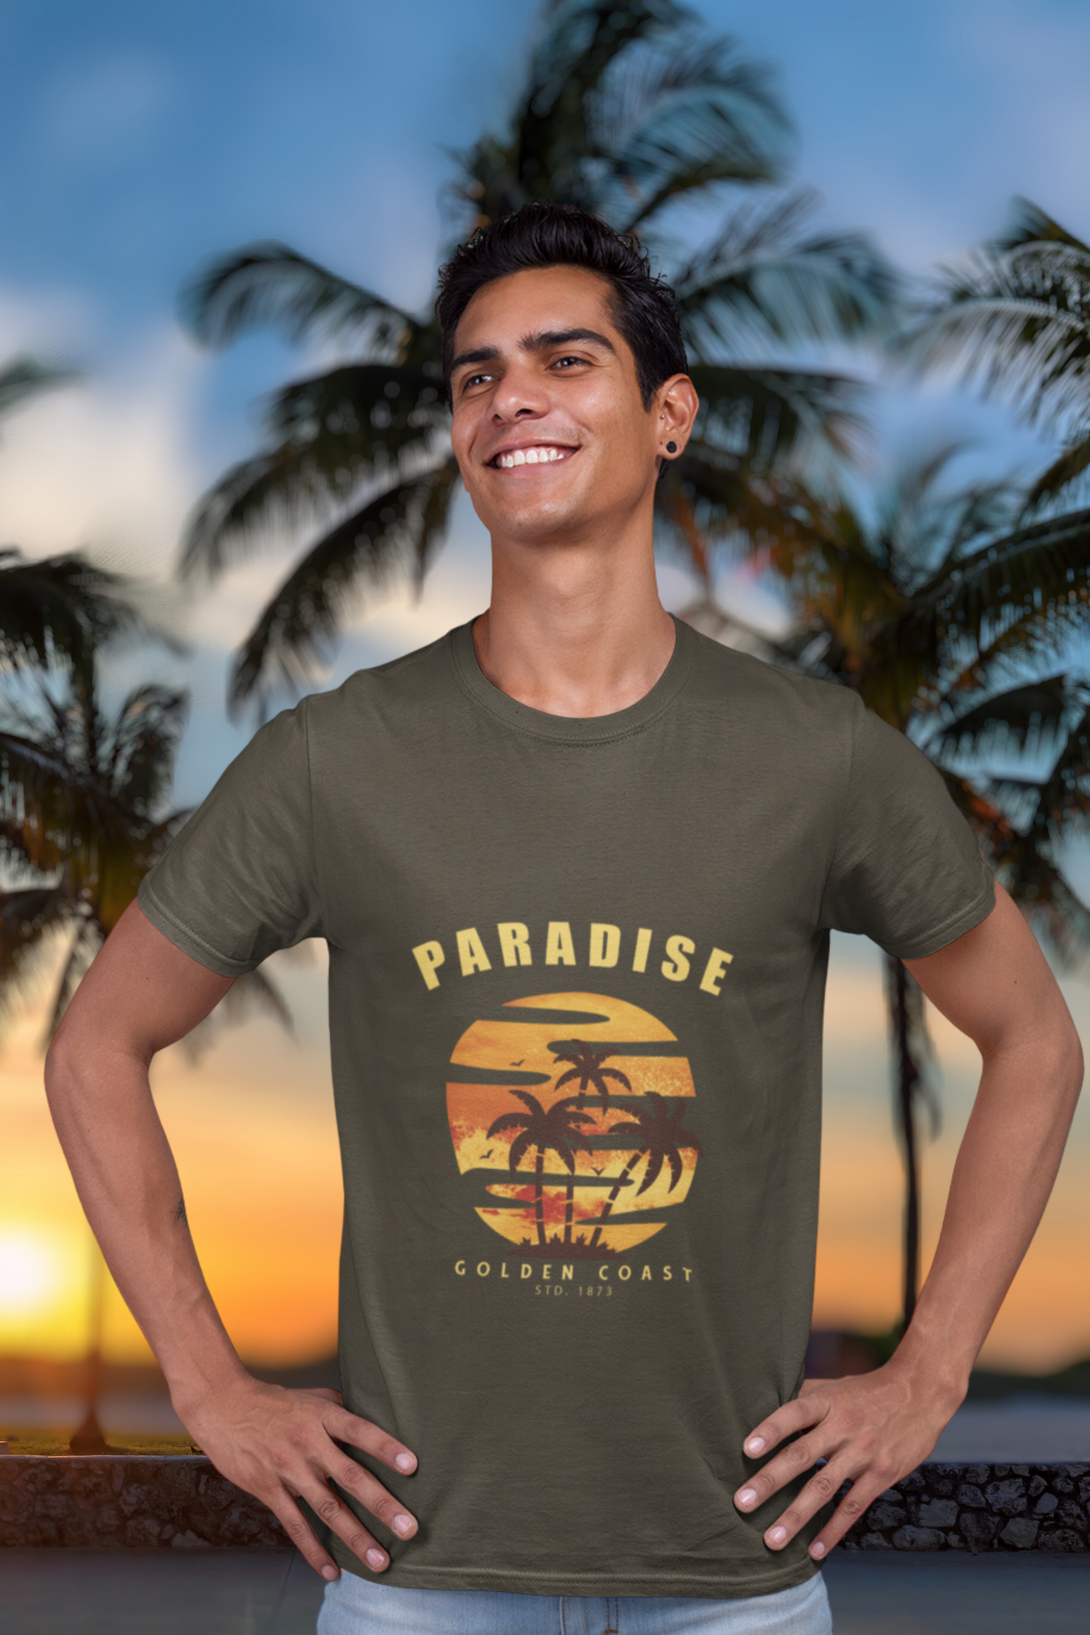 Tropical Paradise Printed T-Shirt For Men - WowWaves - 4